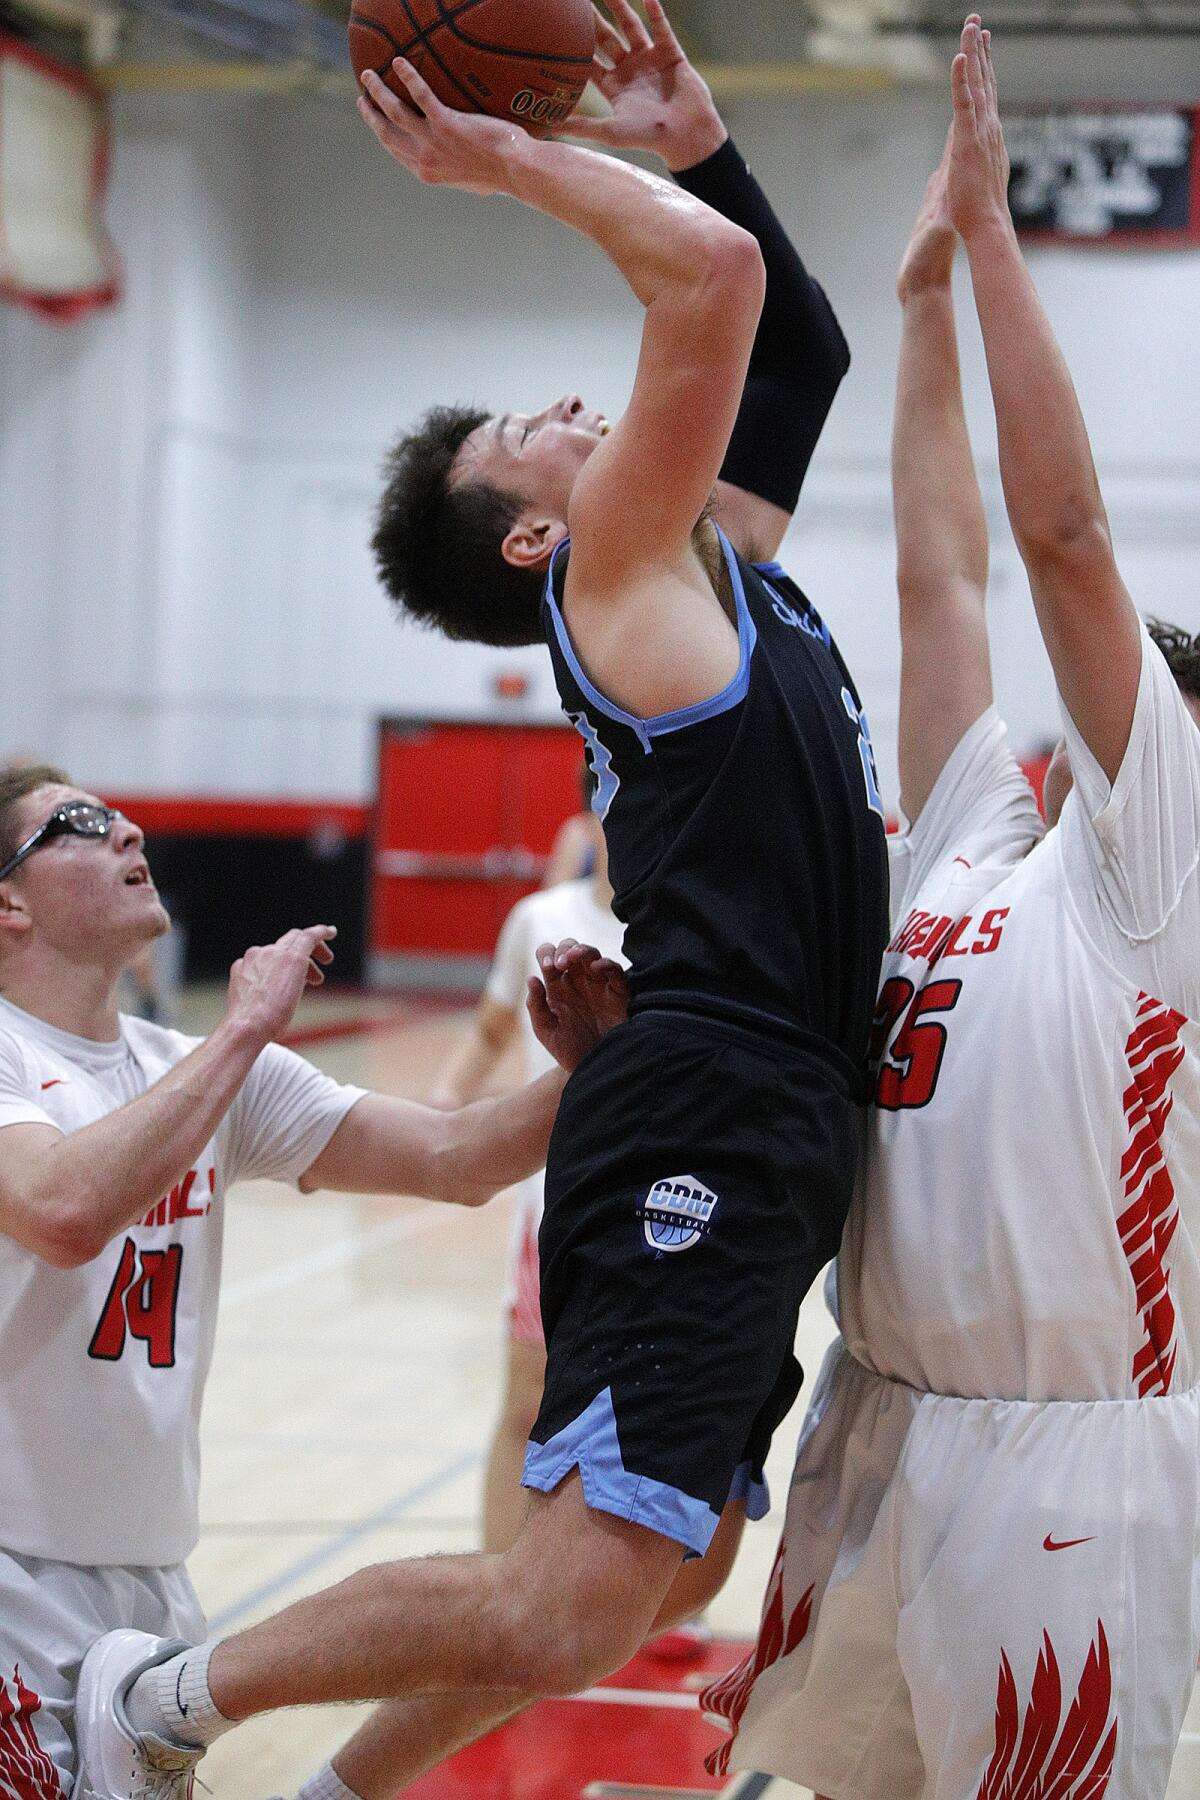 Corona del Mar's Jack Stone drives and leans back to shoot against Whittier's Jaime Albarran in a Artesia Winter Classic pool-play game on Wednesday in Lakewood.